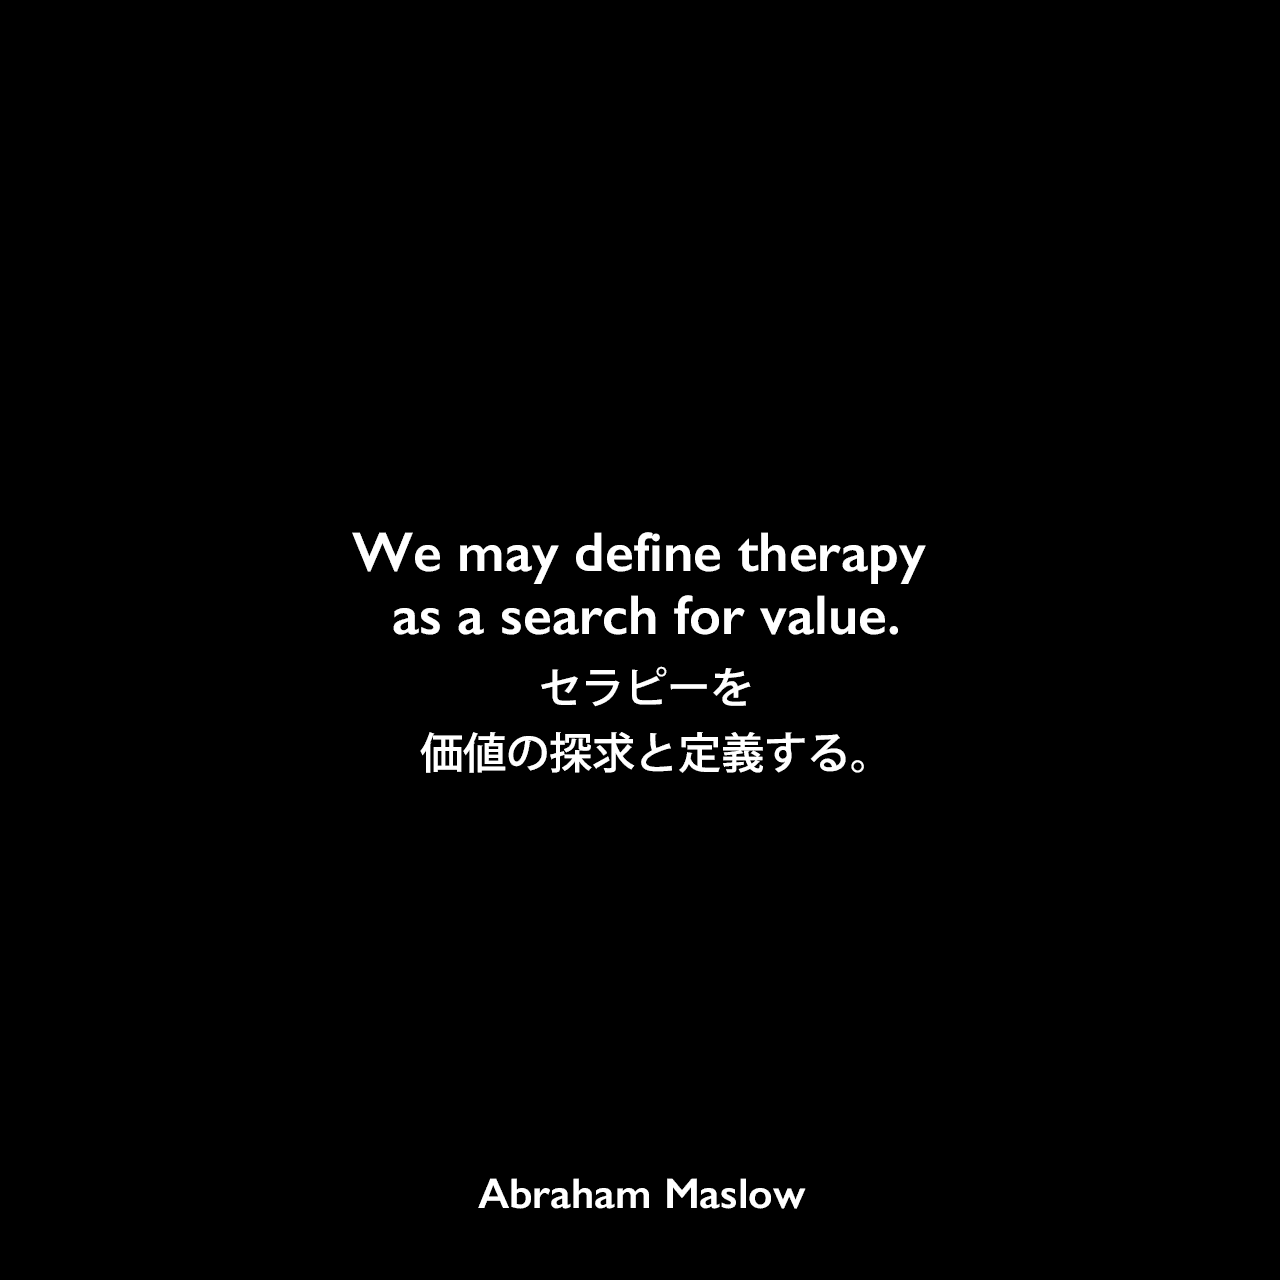 We may define therapy as a search for value.セラピーを価値の探求と定義する。Abraham Maslow